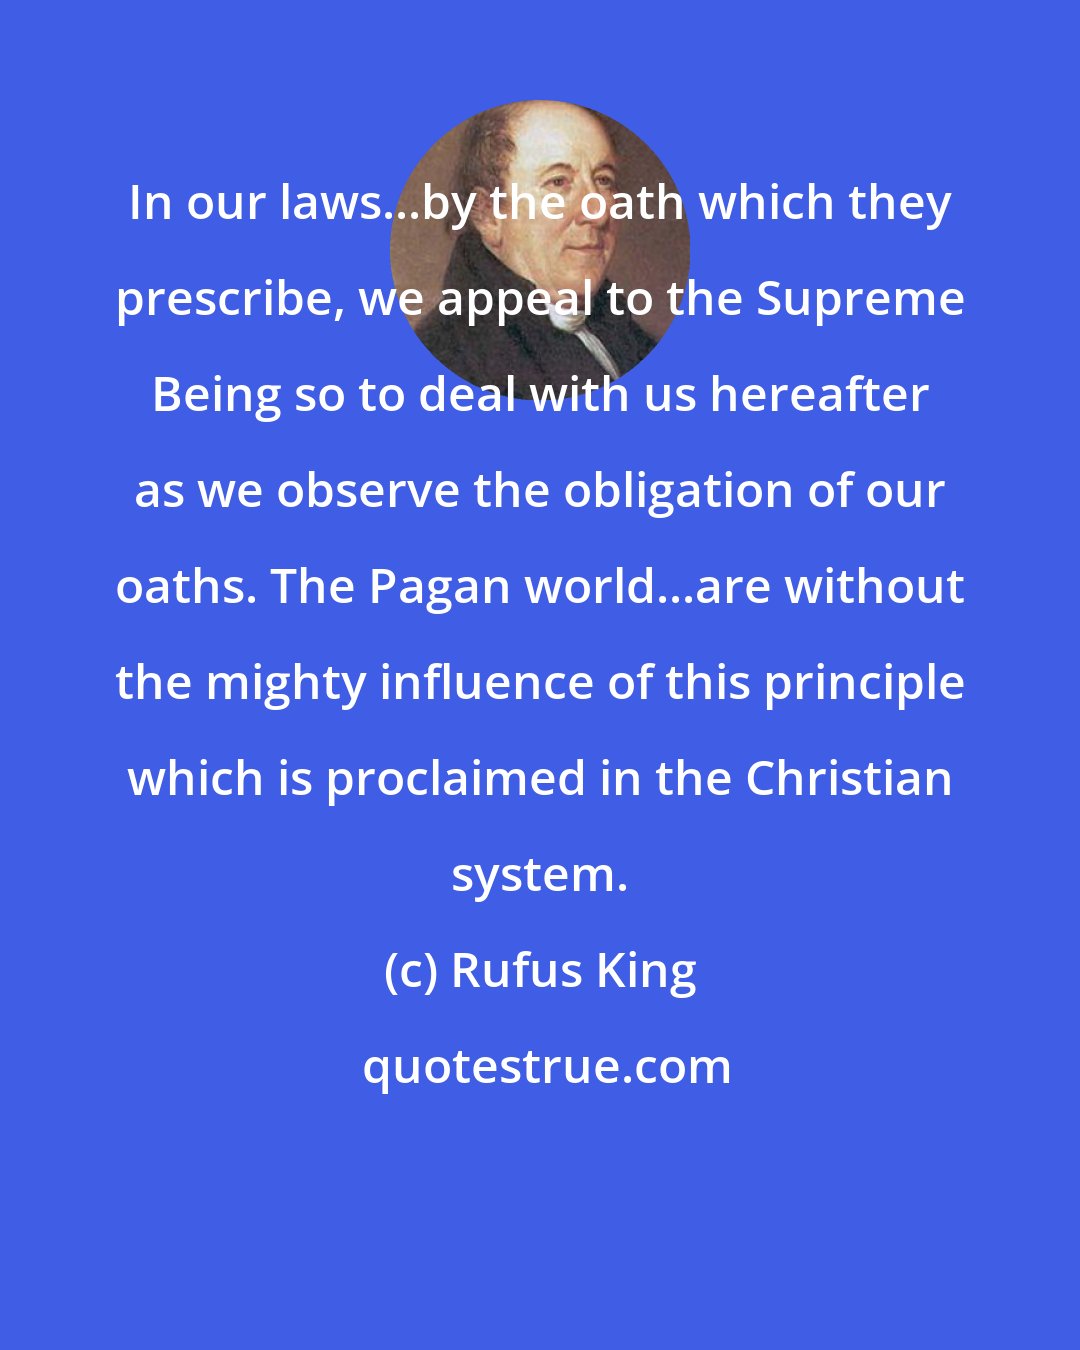 Rufus King: In our laws...by the oath which they prescribe, we appeal to the Supreme Being so to deal with us hereafter as we observe the obligation of our oaths. The Pagan world...are without the mighty influence of this principle which is proclaimed in the Christian system.